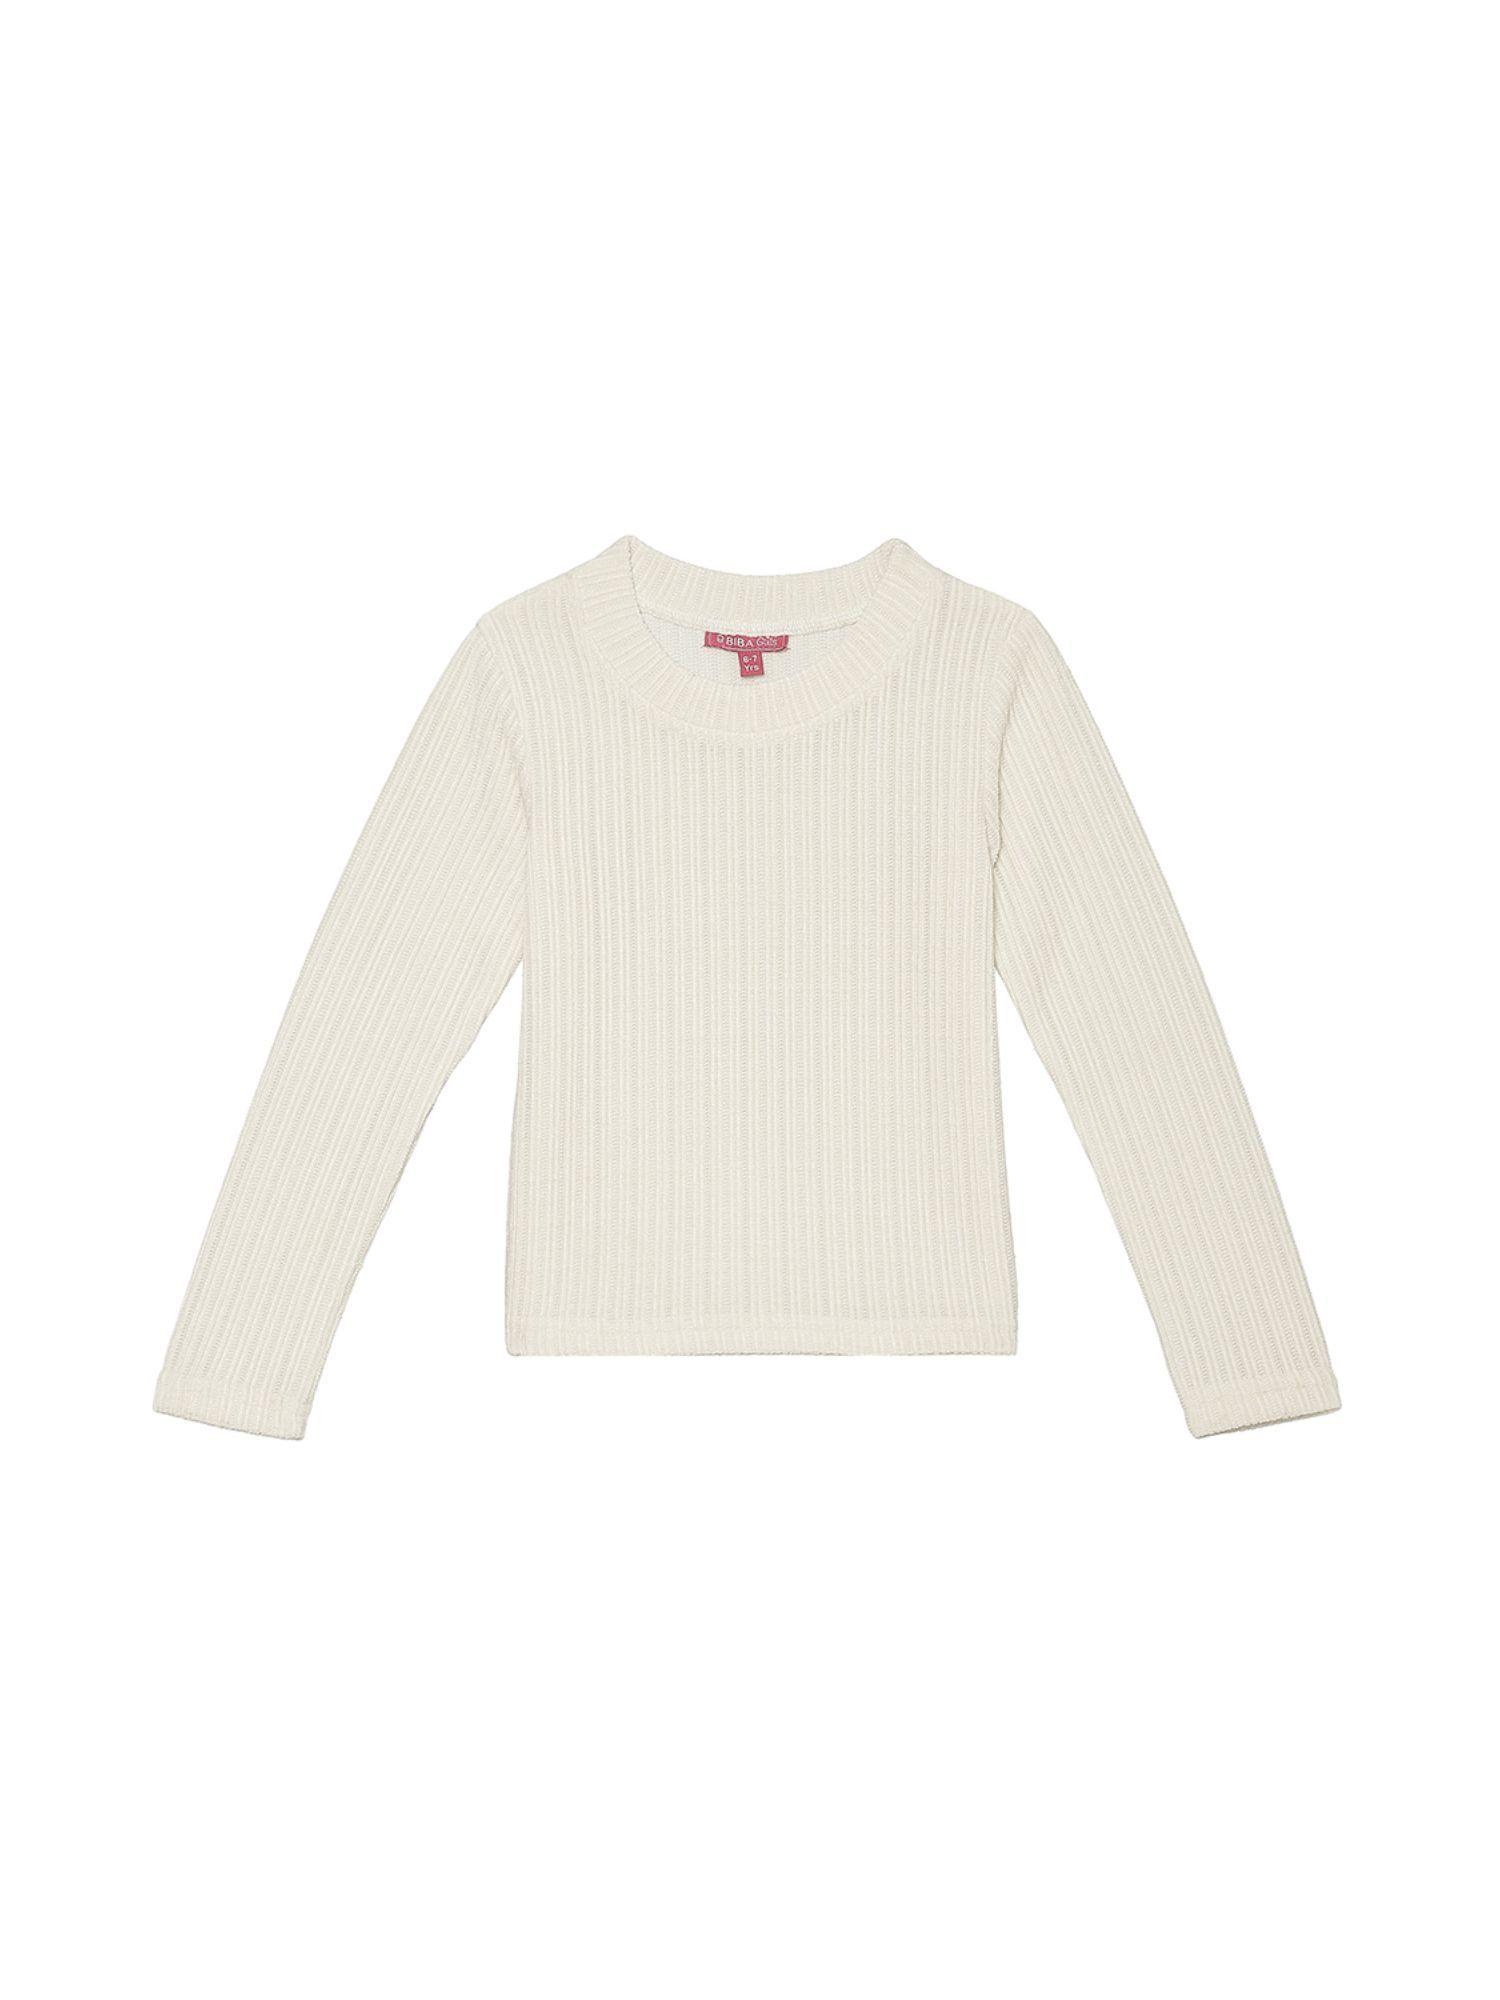 off white polyester solid sweater tops